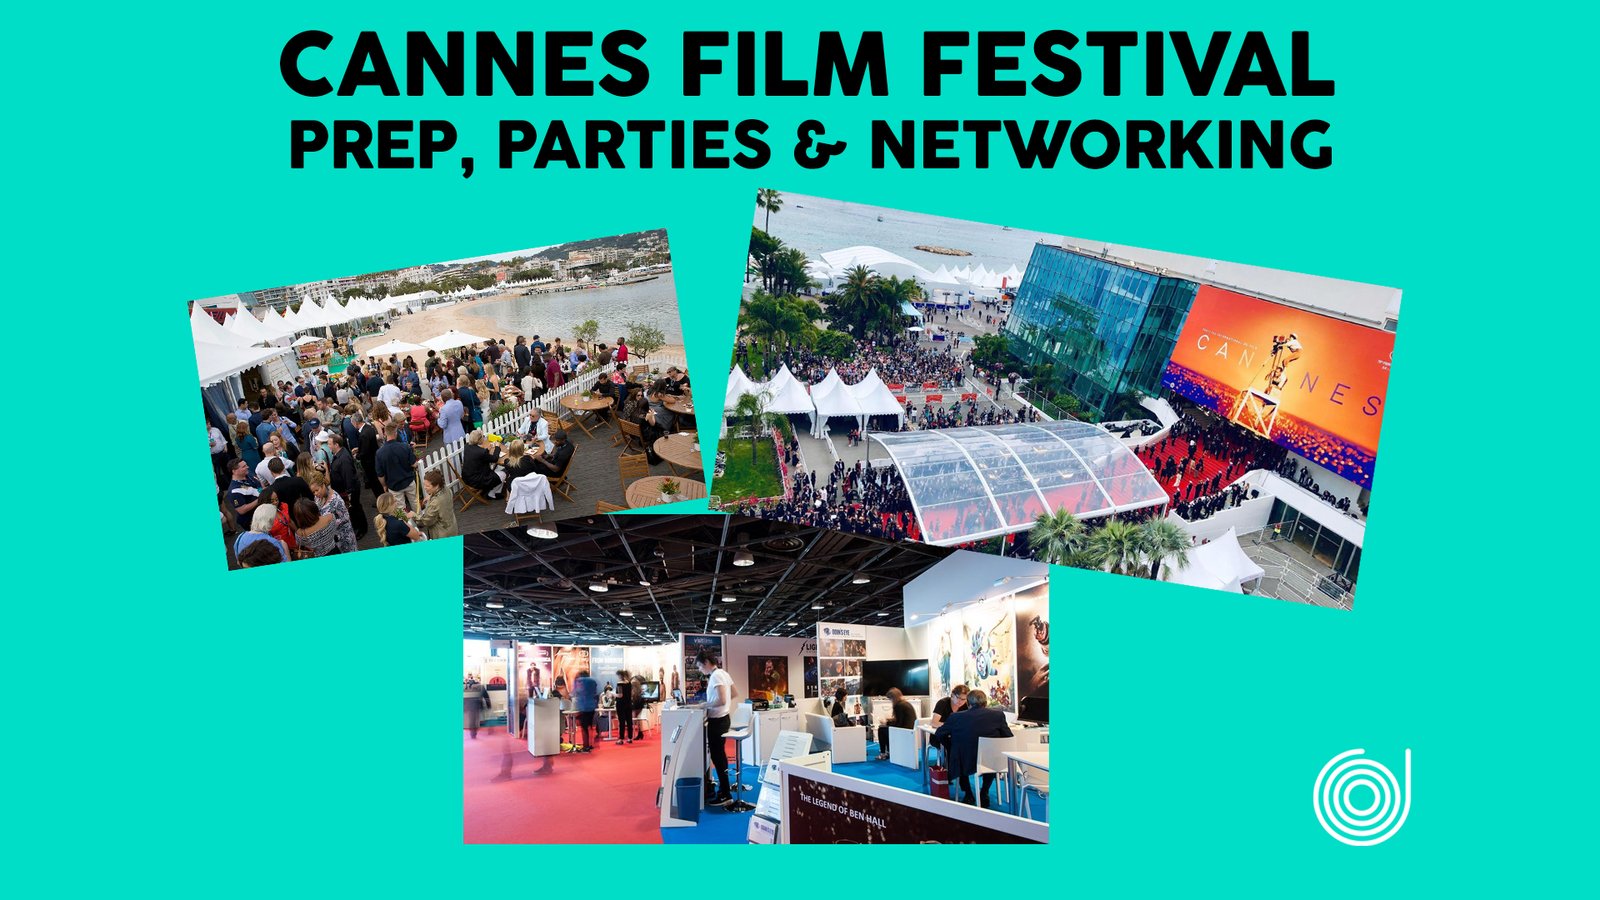 Cannes Film Festival Guide - Pre, Parties & Networking